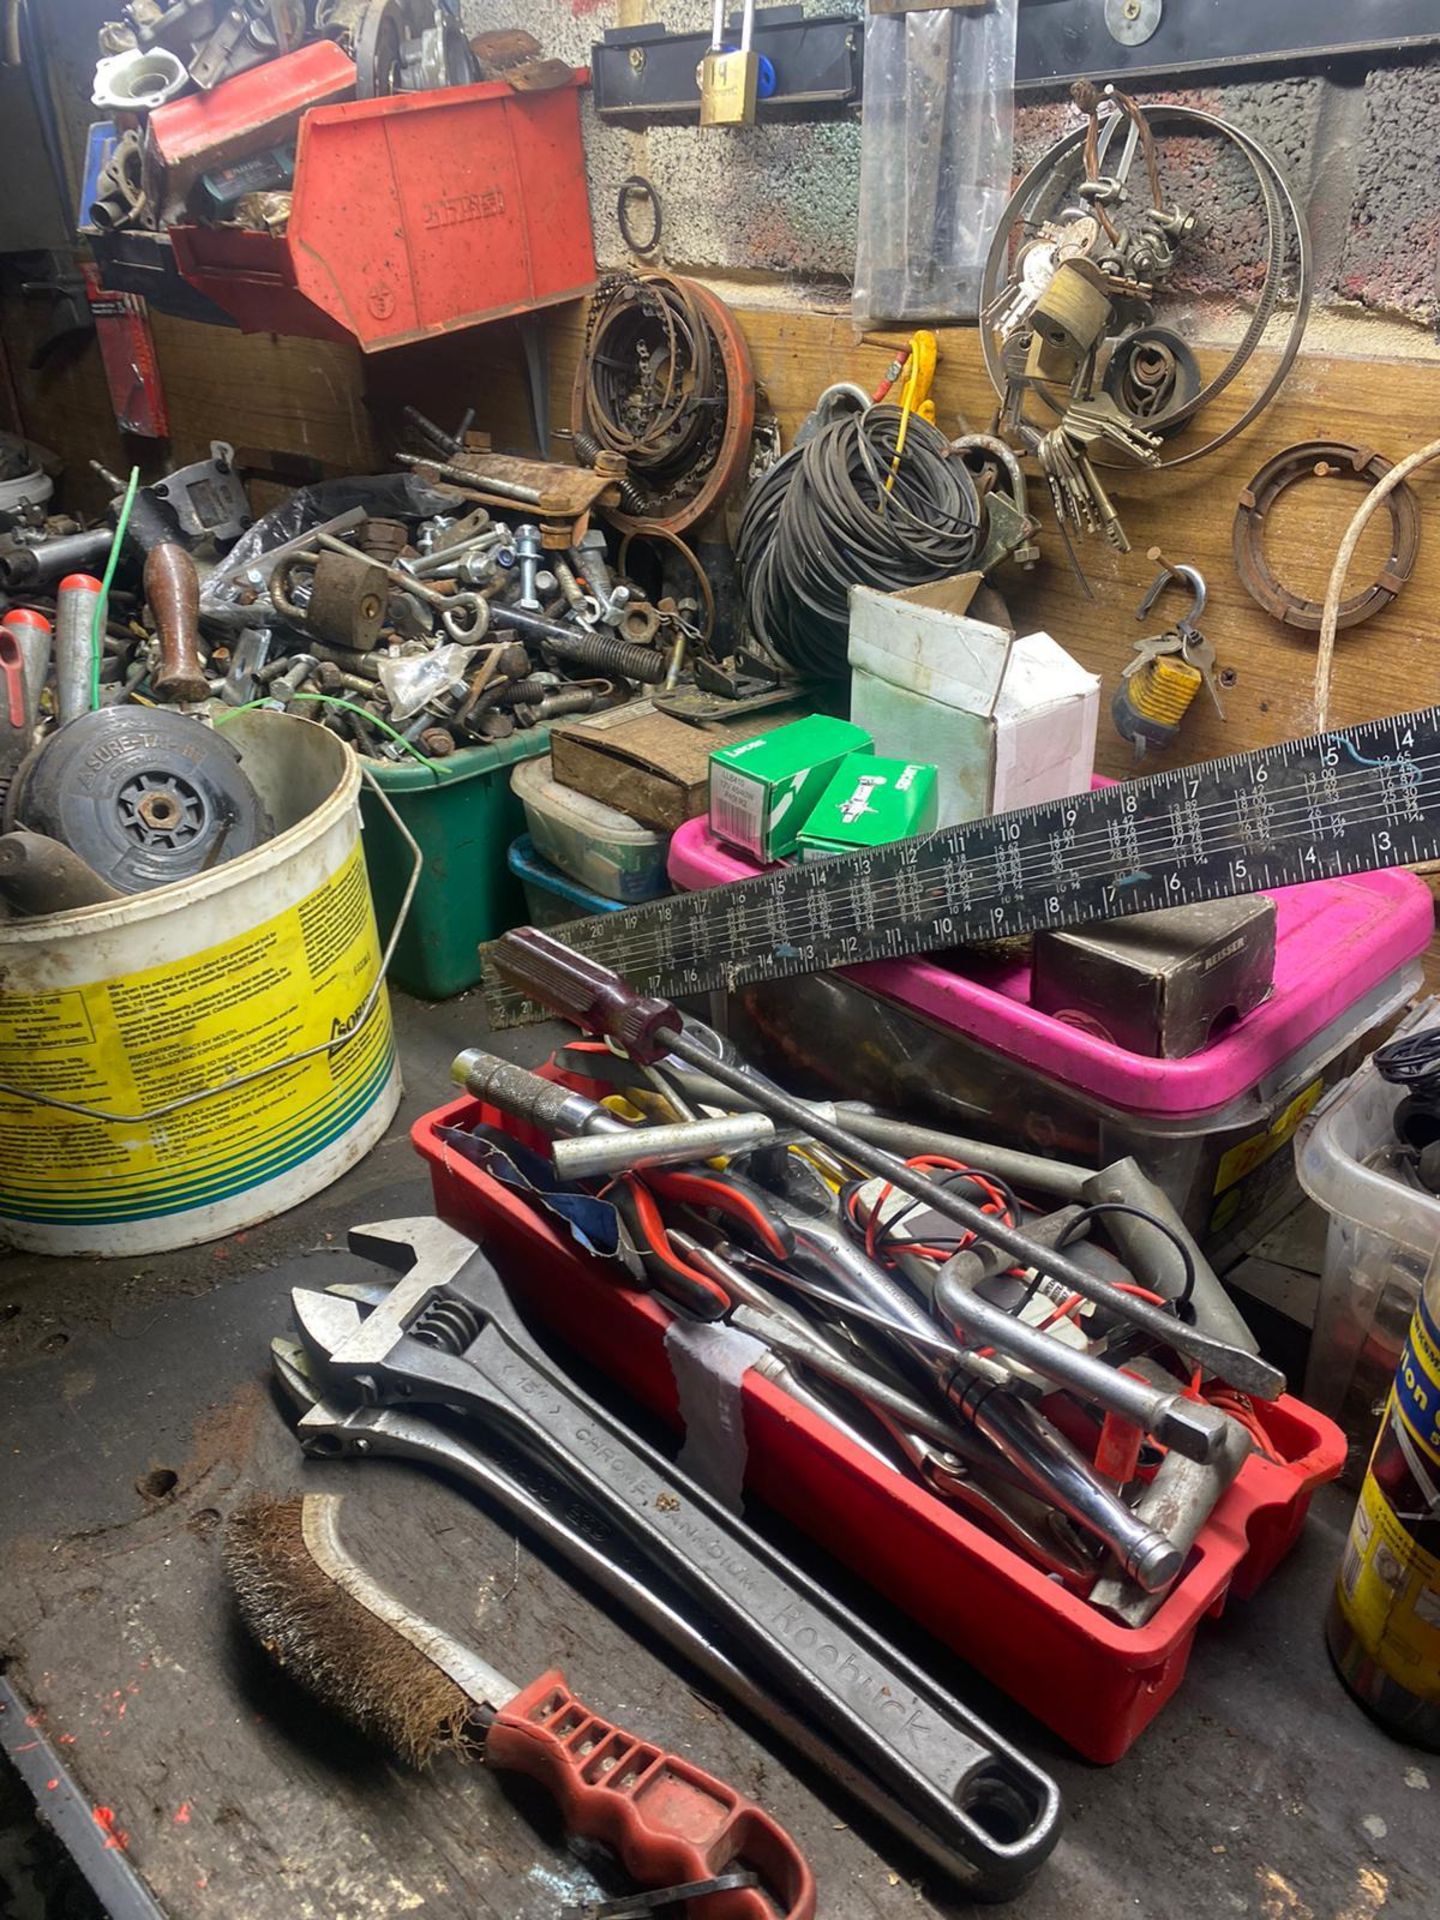 Contents of a workshop to include tools, bolts, screws  and other useful hardware - Image 4 of 4